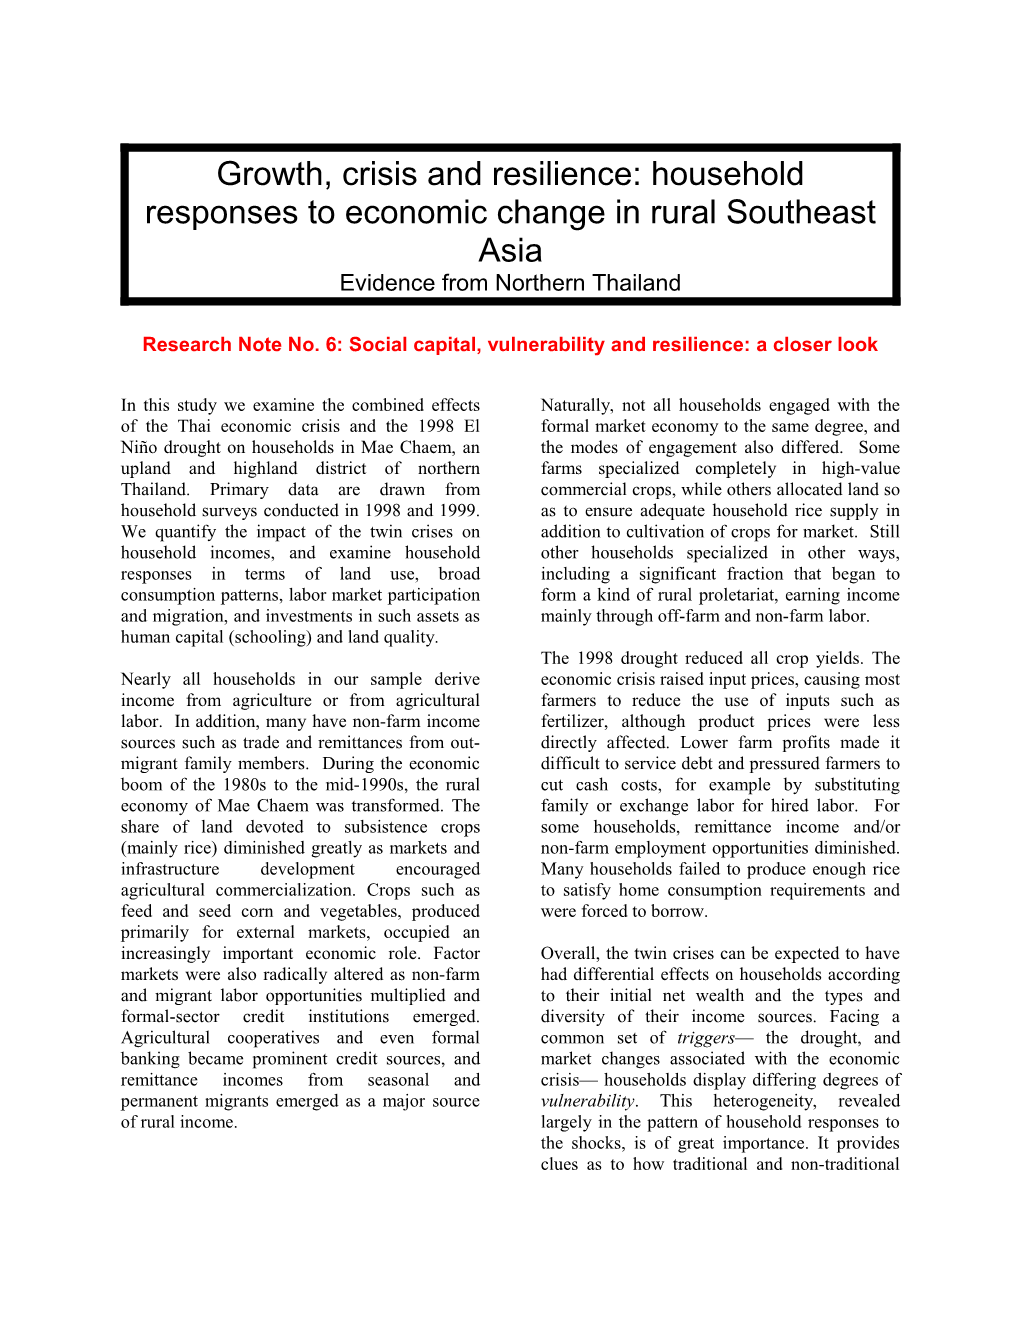 Growth, Crisis and Resilience: Consumption, Resource Use and Investment Responses to Economic